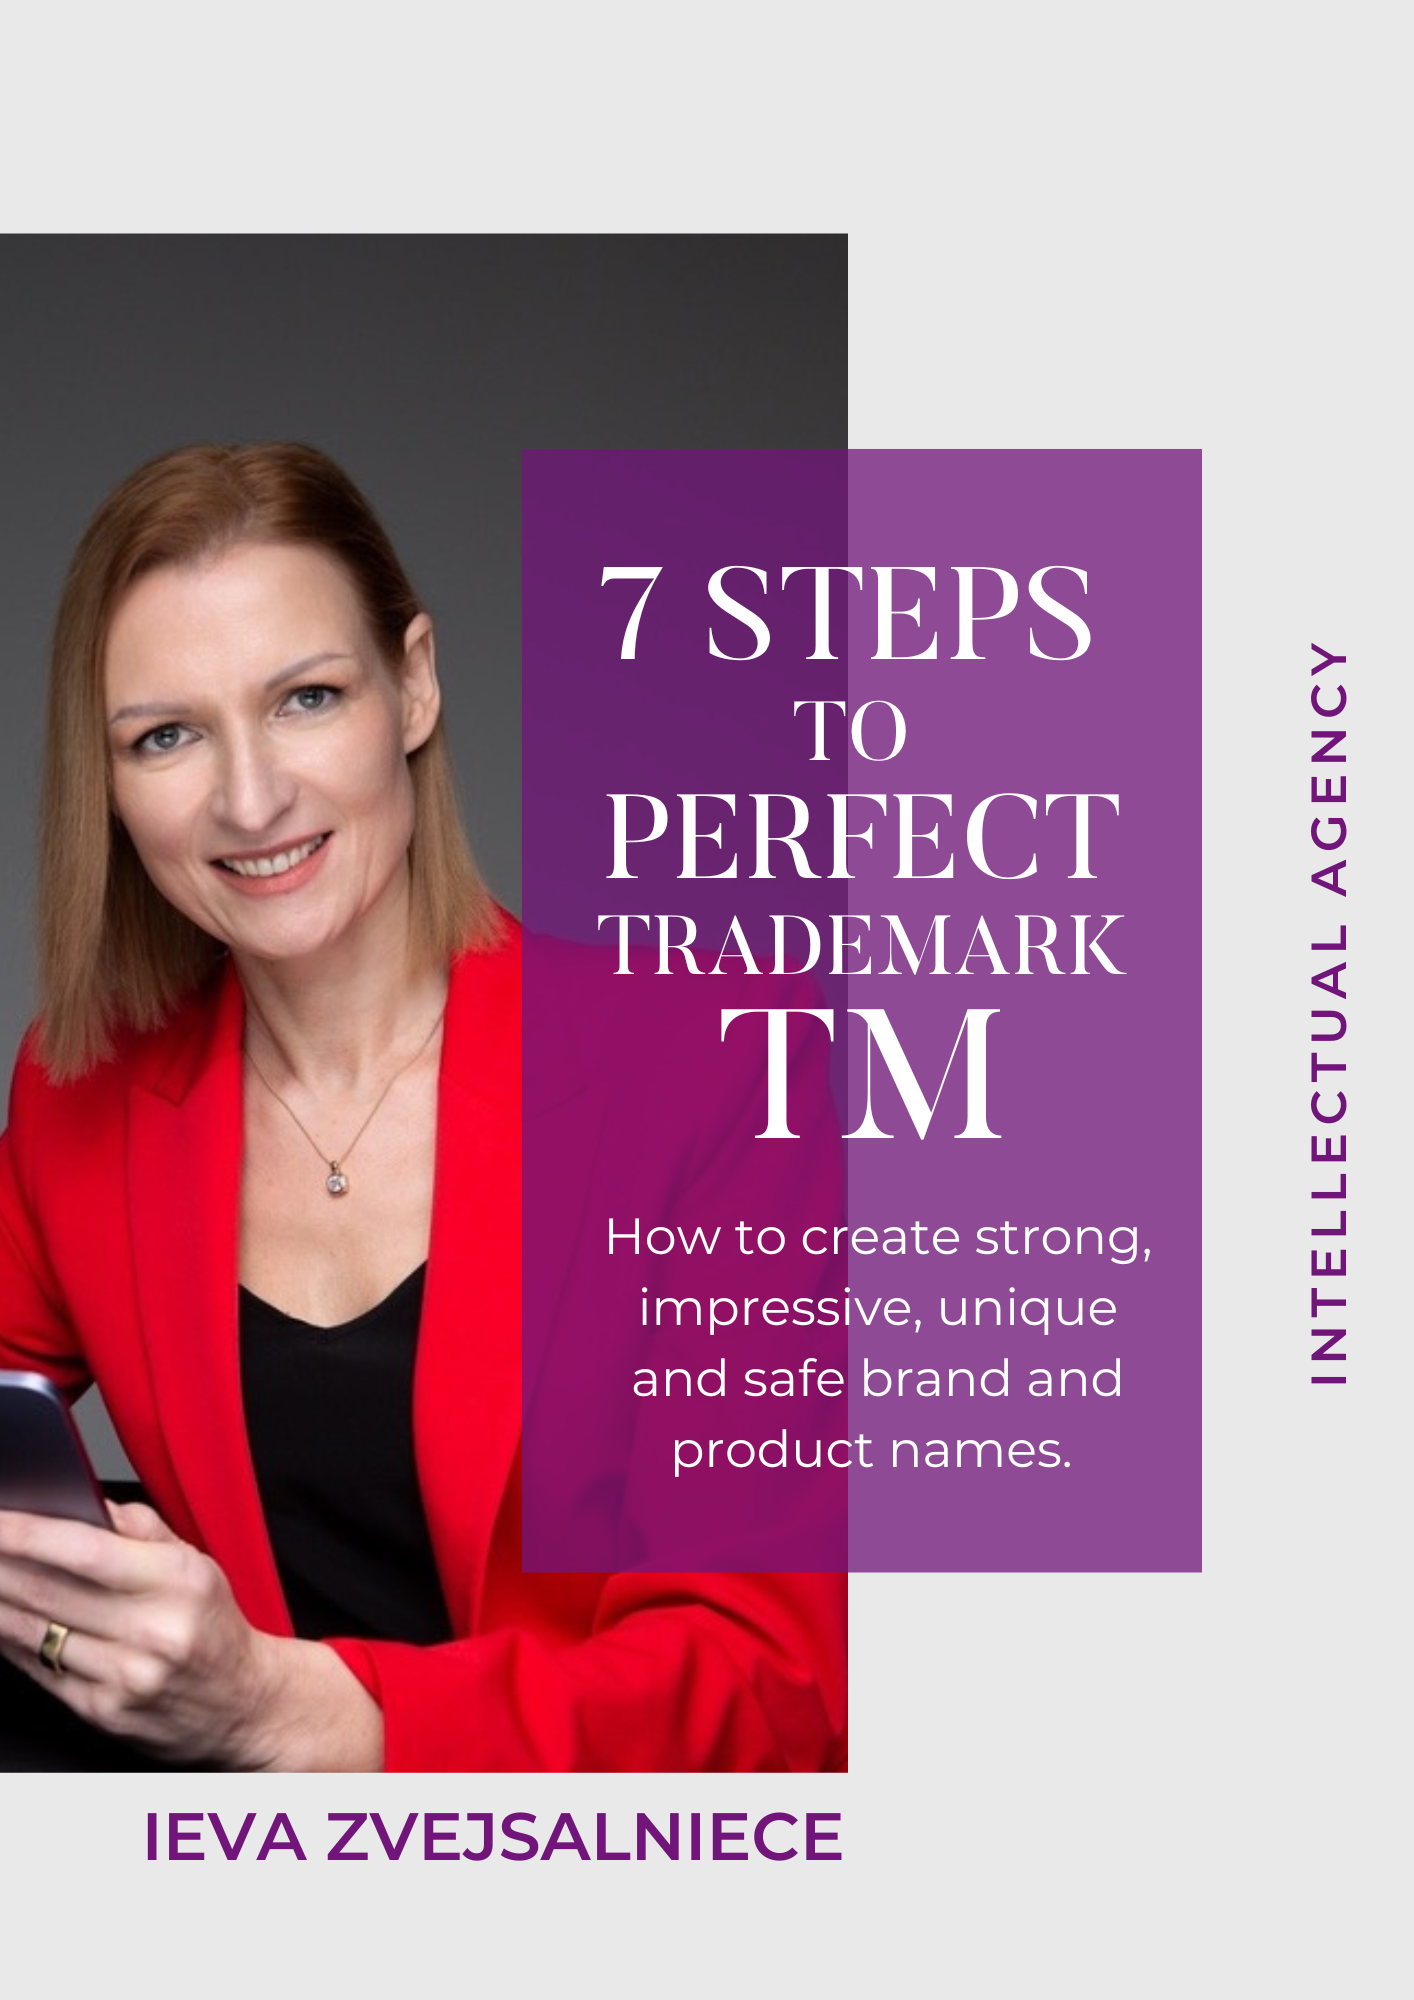 7 Steps to Perfect Trademark